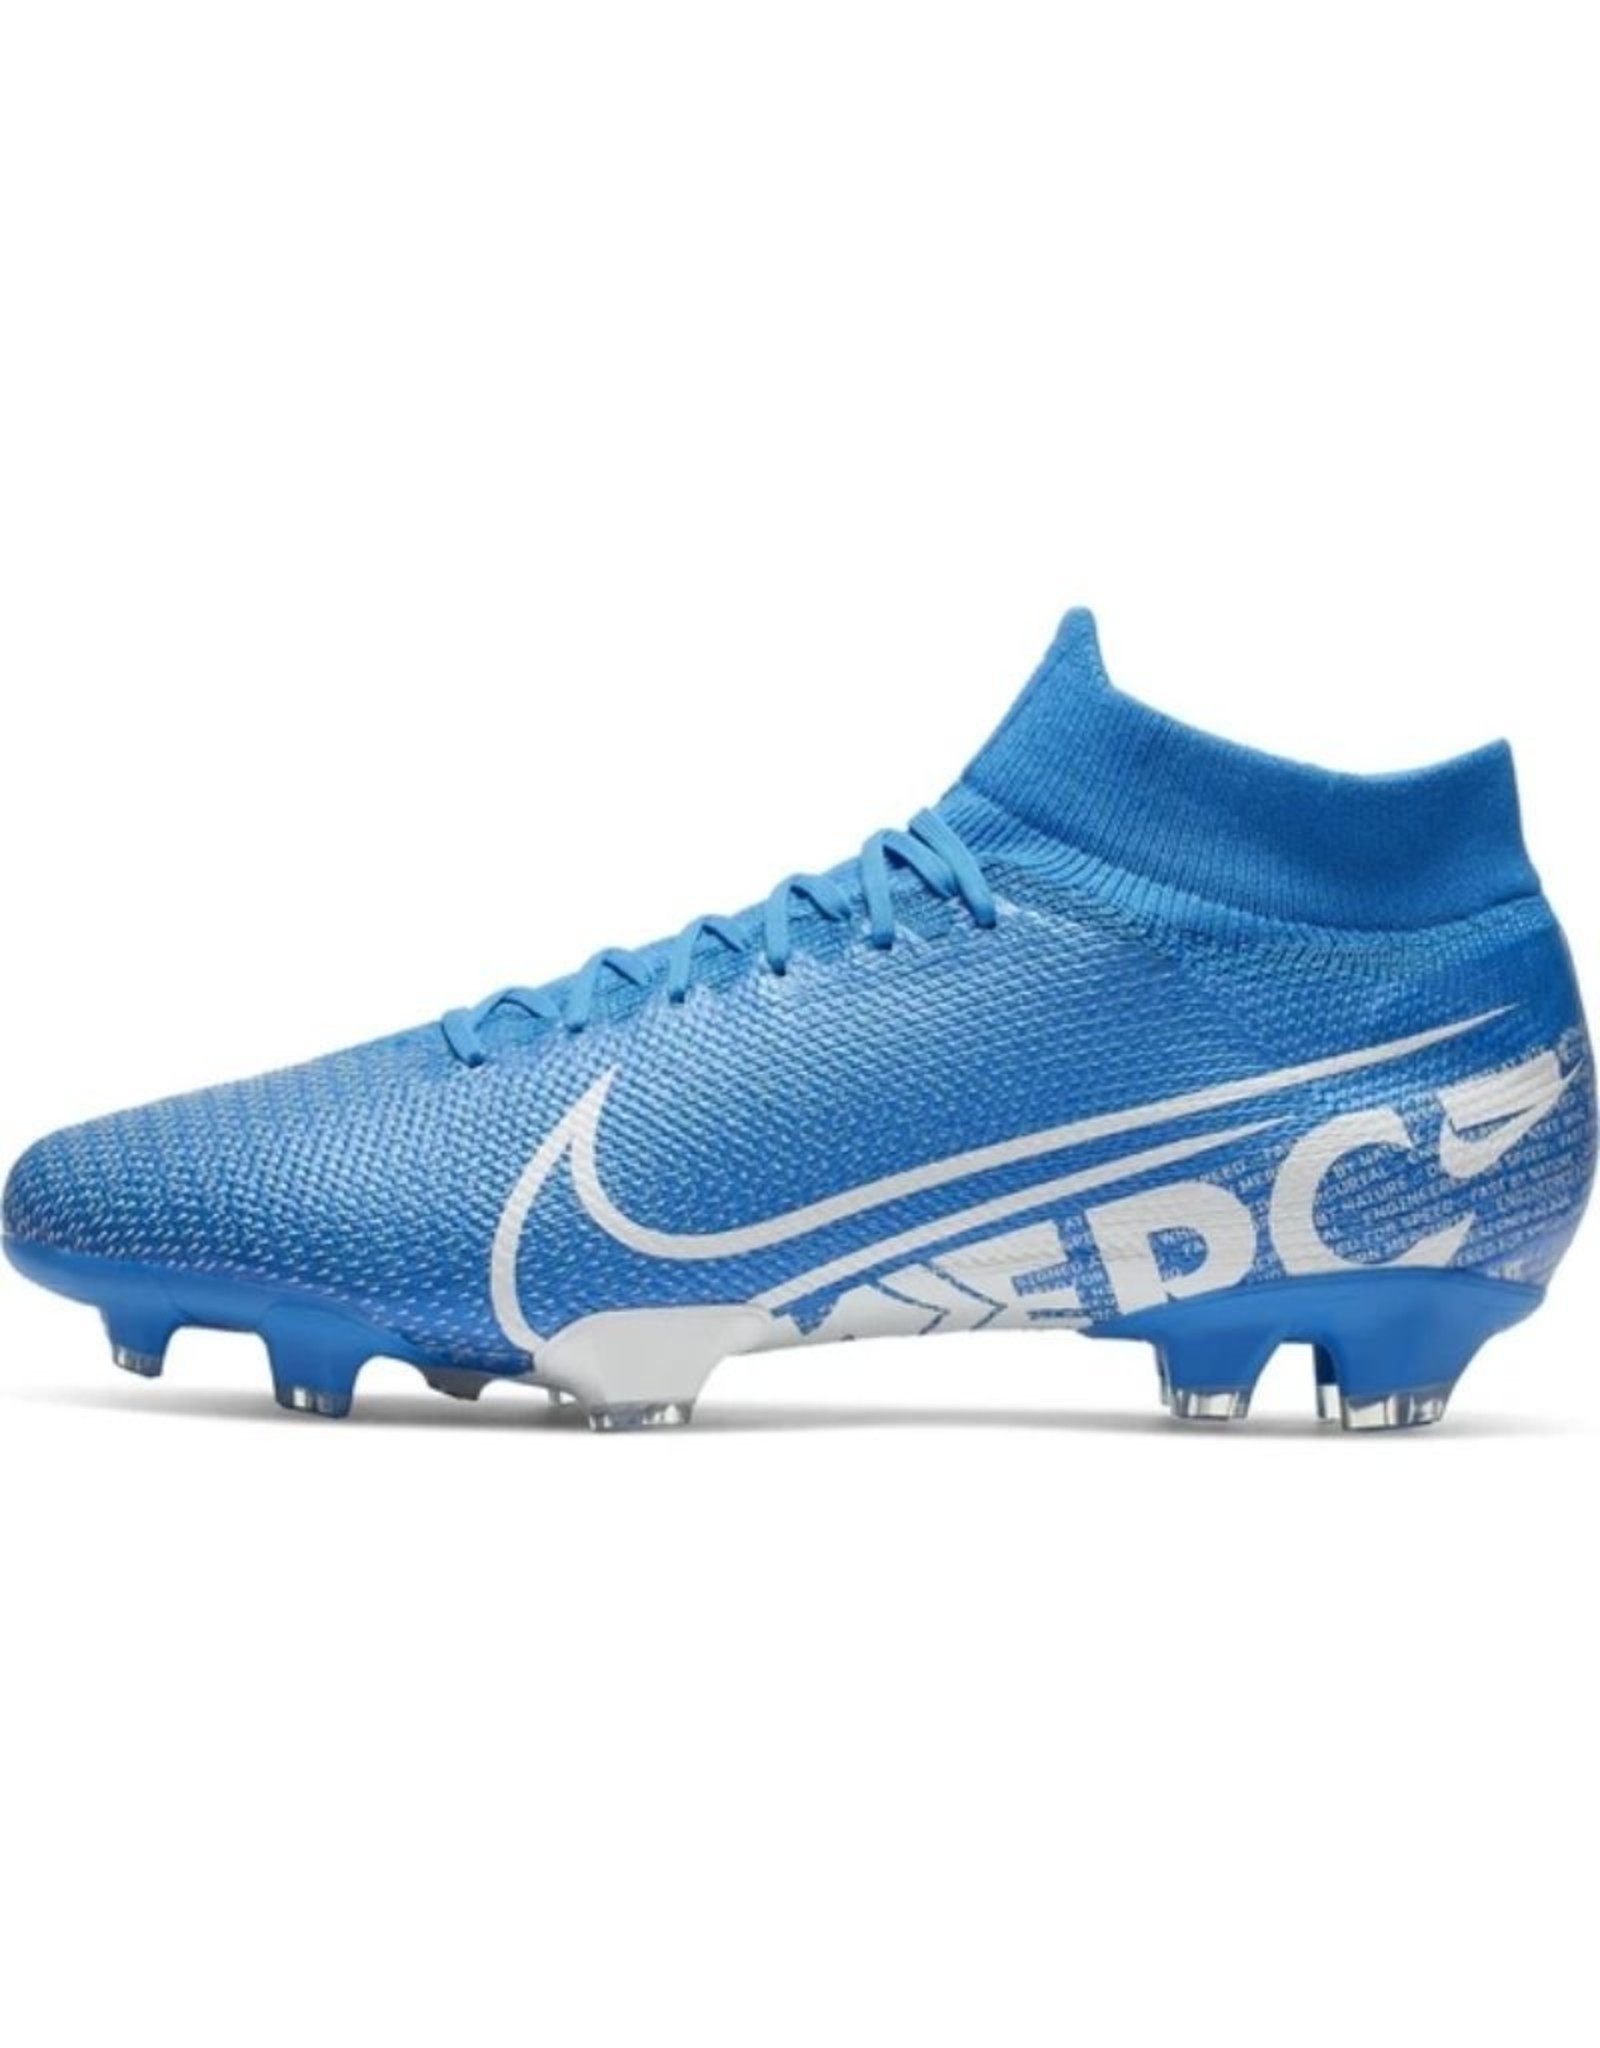 nike teal soccer cleats